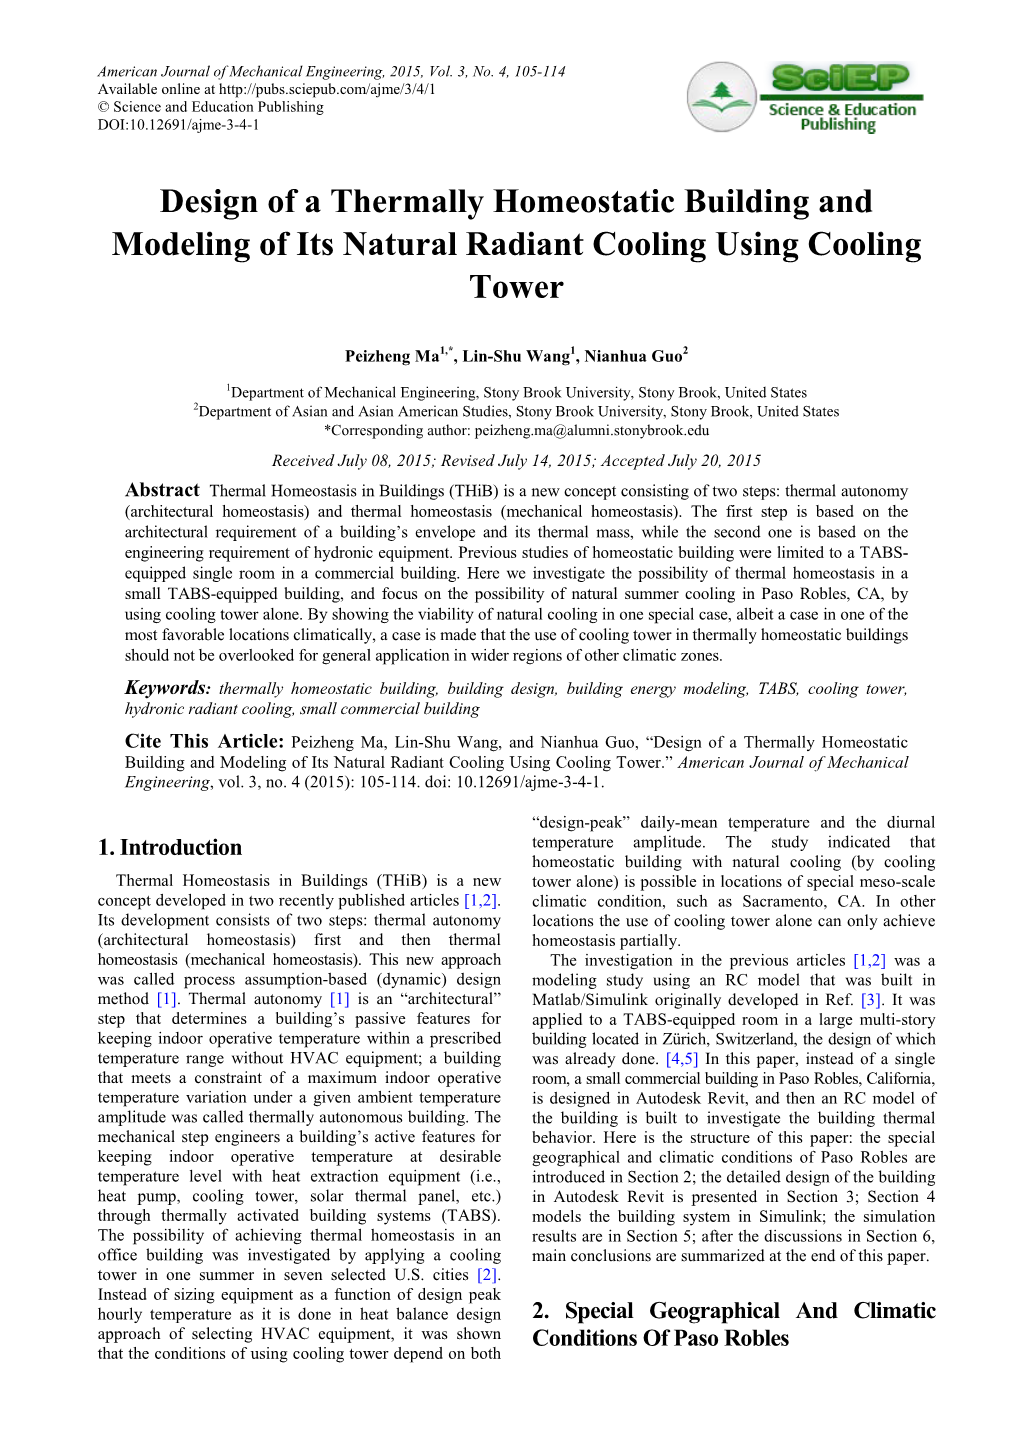 Design of a Thermally Homeostatic Building and Modeling of Its Natural Radiant Cooling Using Cooling Tower